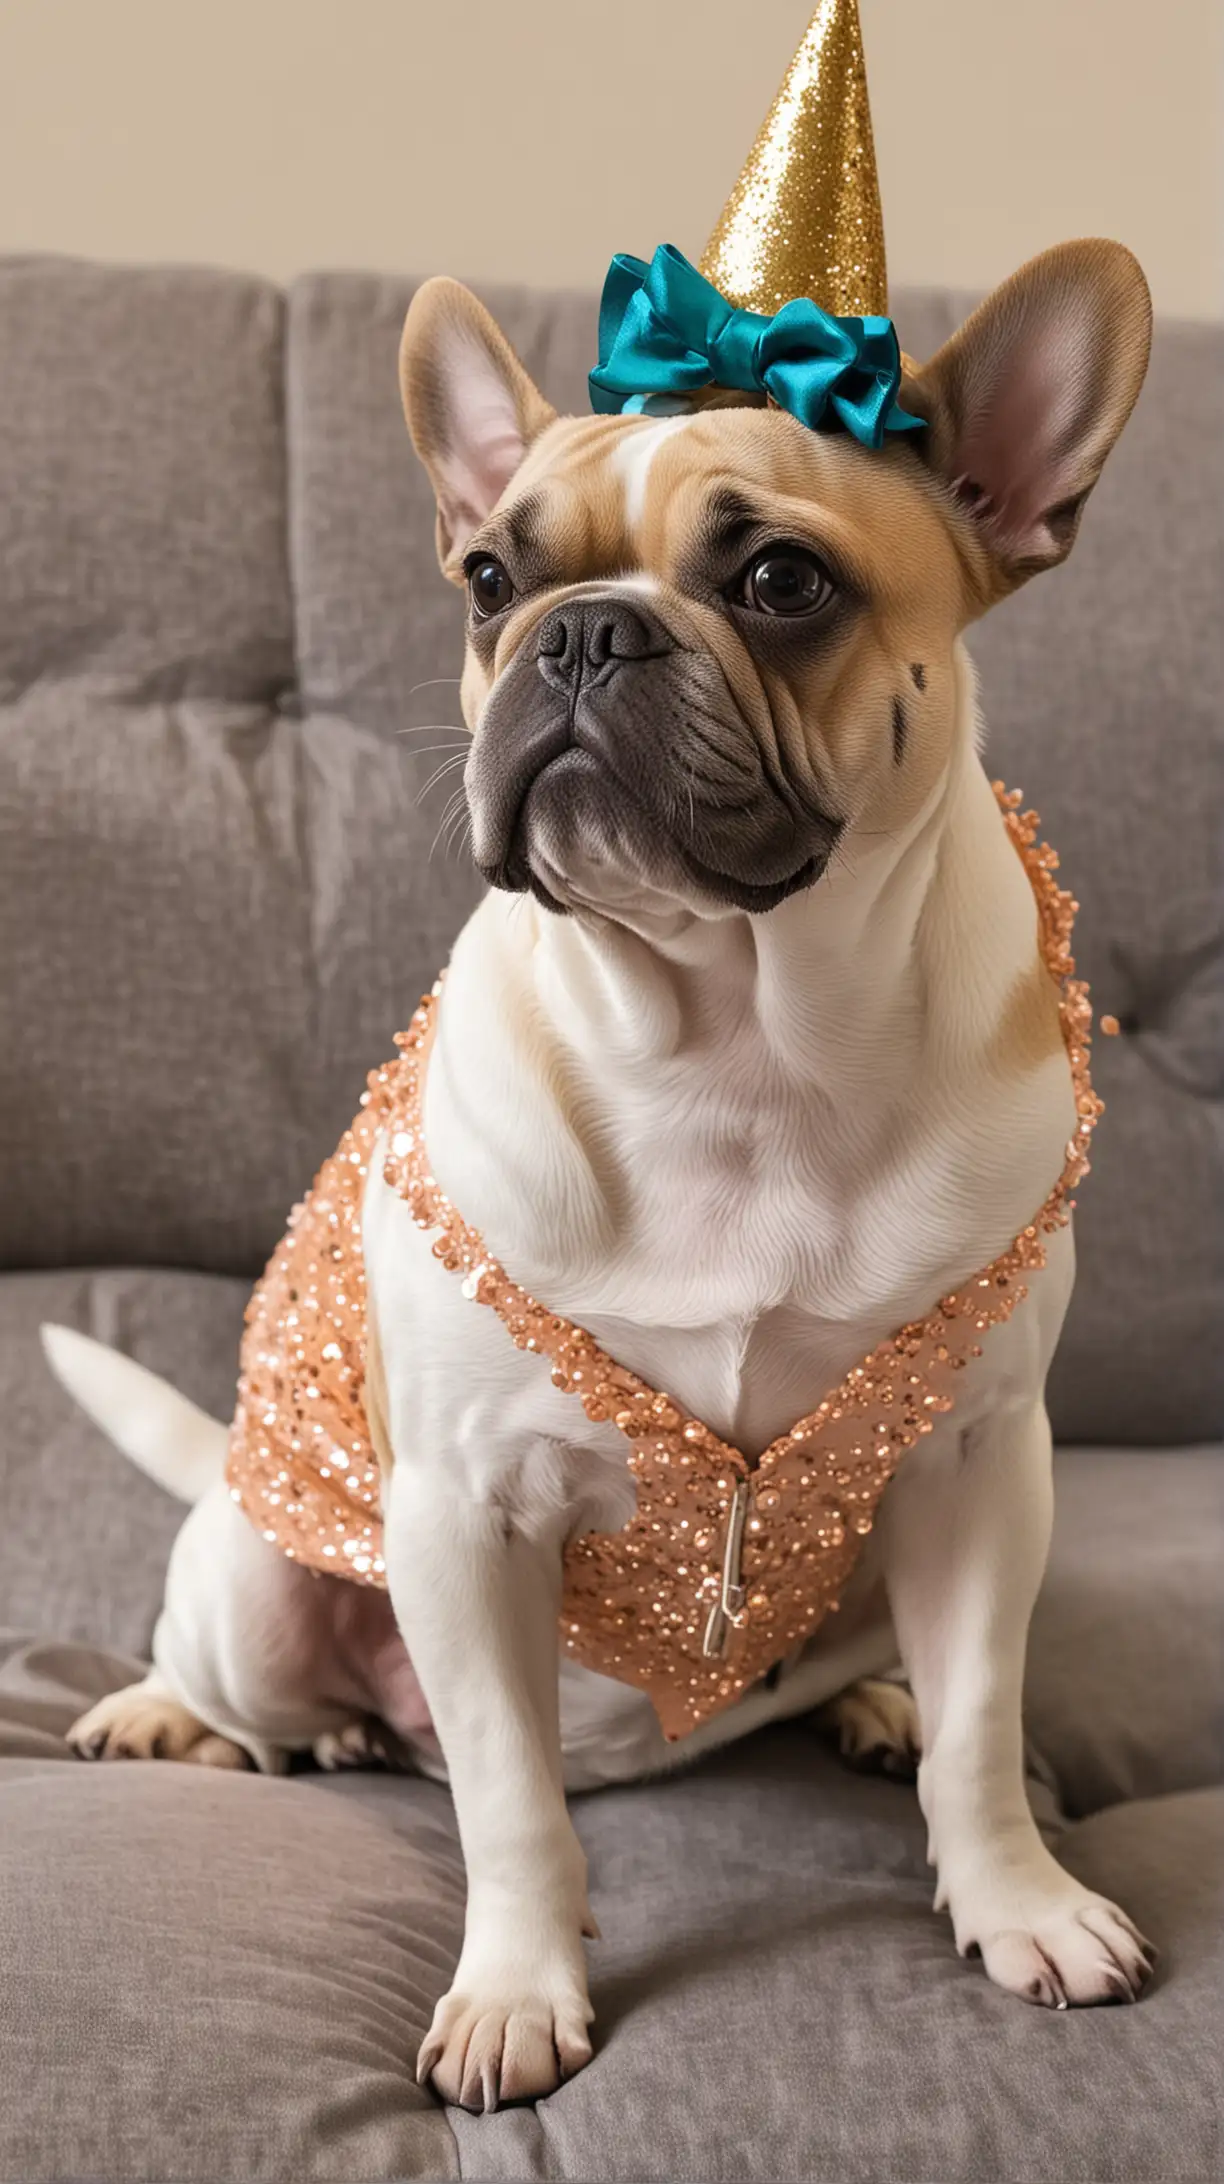 French Bulldog Dressed Up Party Costume for a Playful Pup